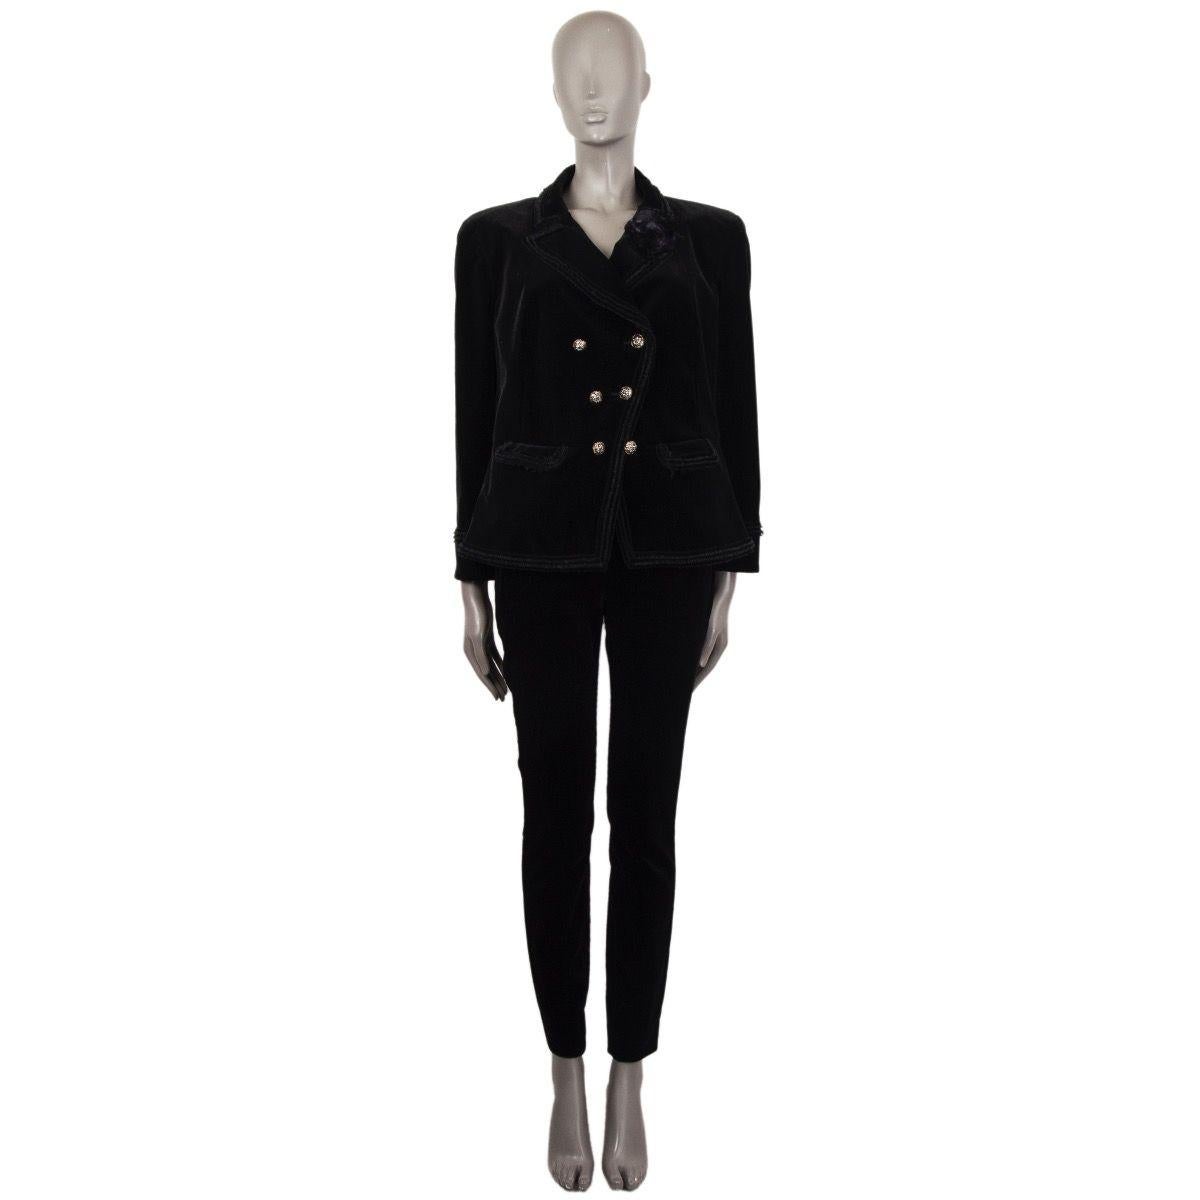 CHanel double-breasted velvet blazer in black ctoon (99%) and elastane (1%). With peak collar, short.fringe trims, two flap pockets on the front, and diagonal front seam, Closes with embellished CC buttons in antique gold, black and white metal and